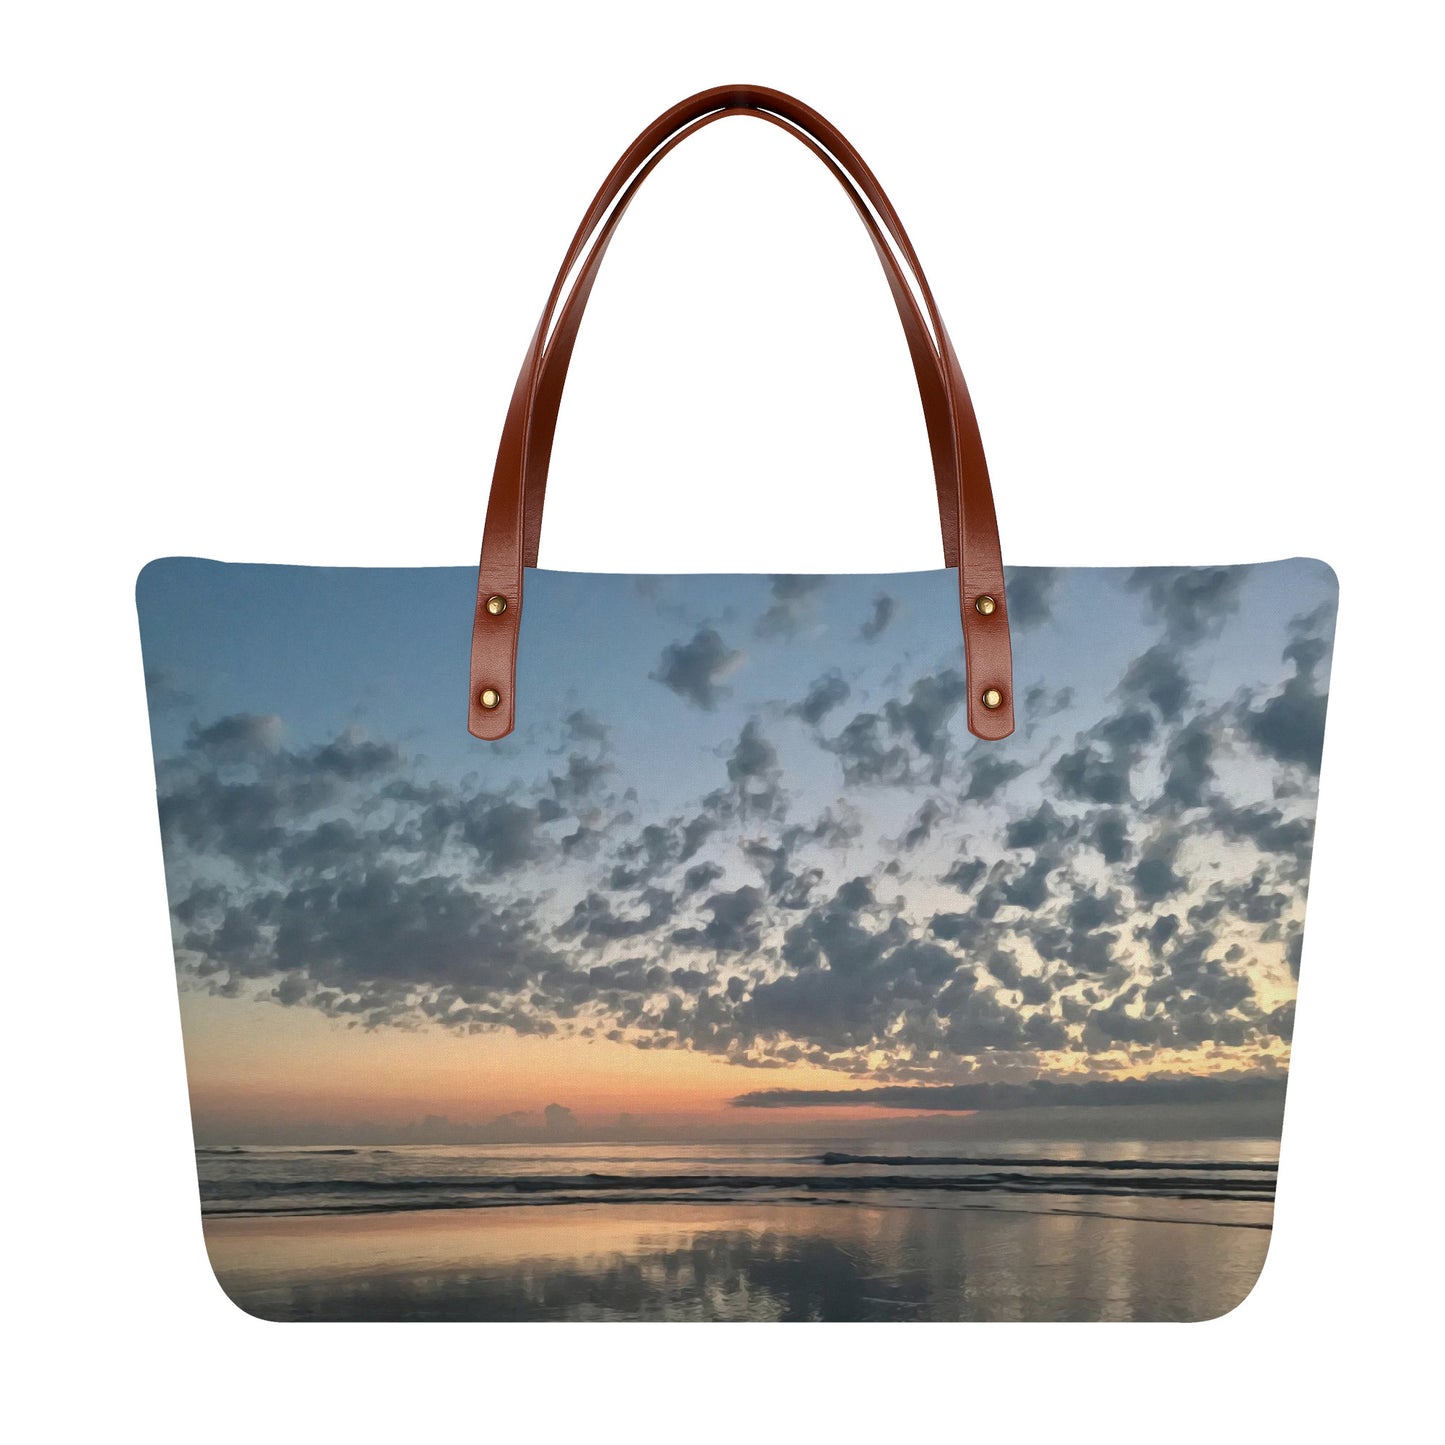 Reflections - Everyday Tote Bag